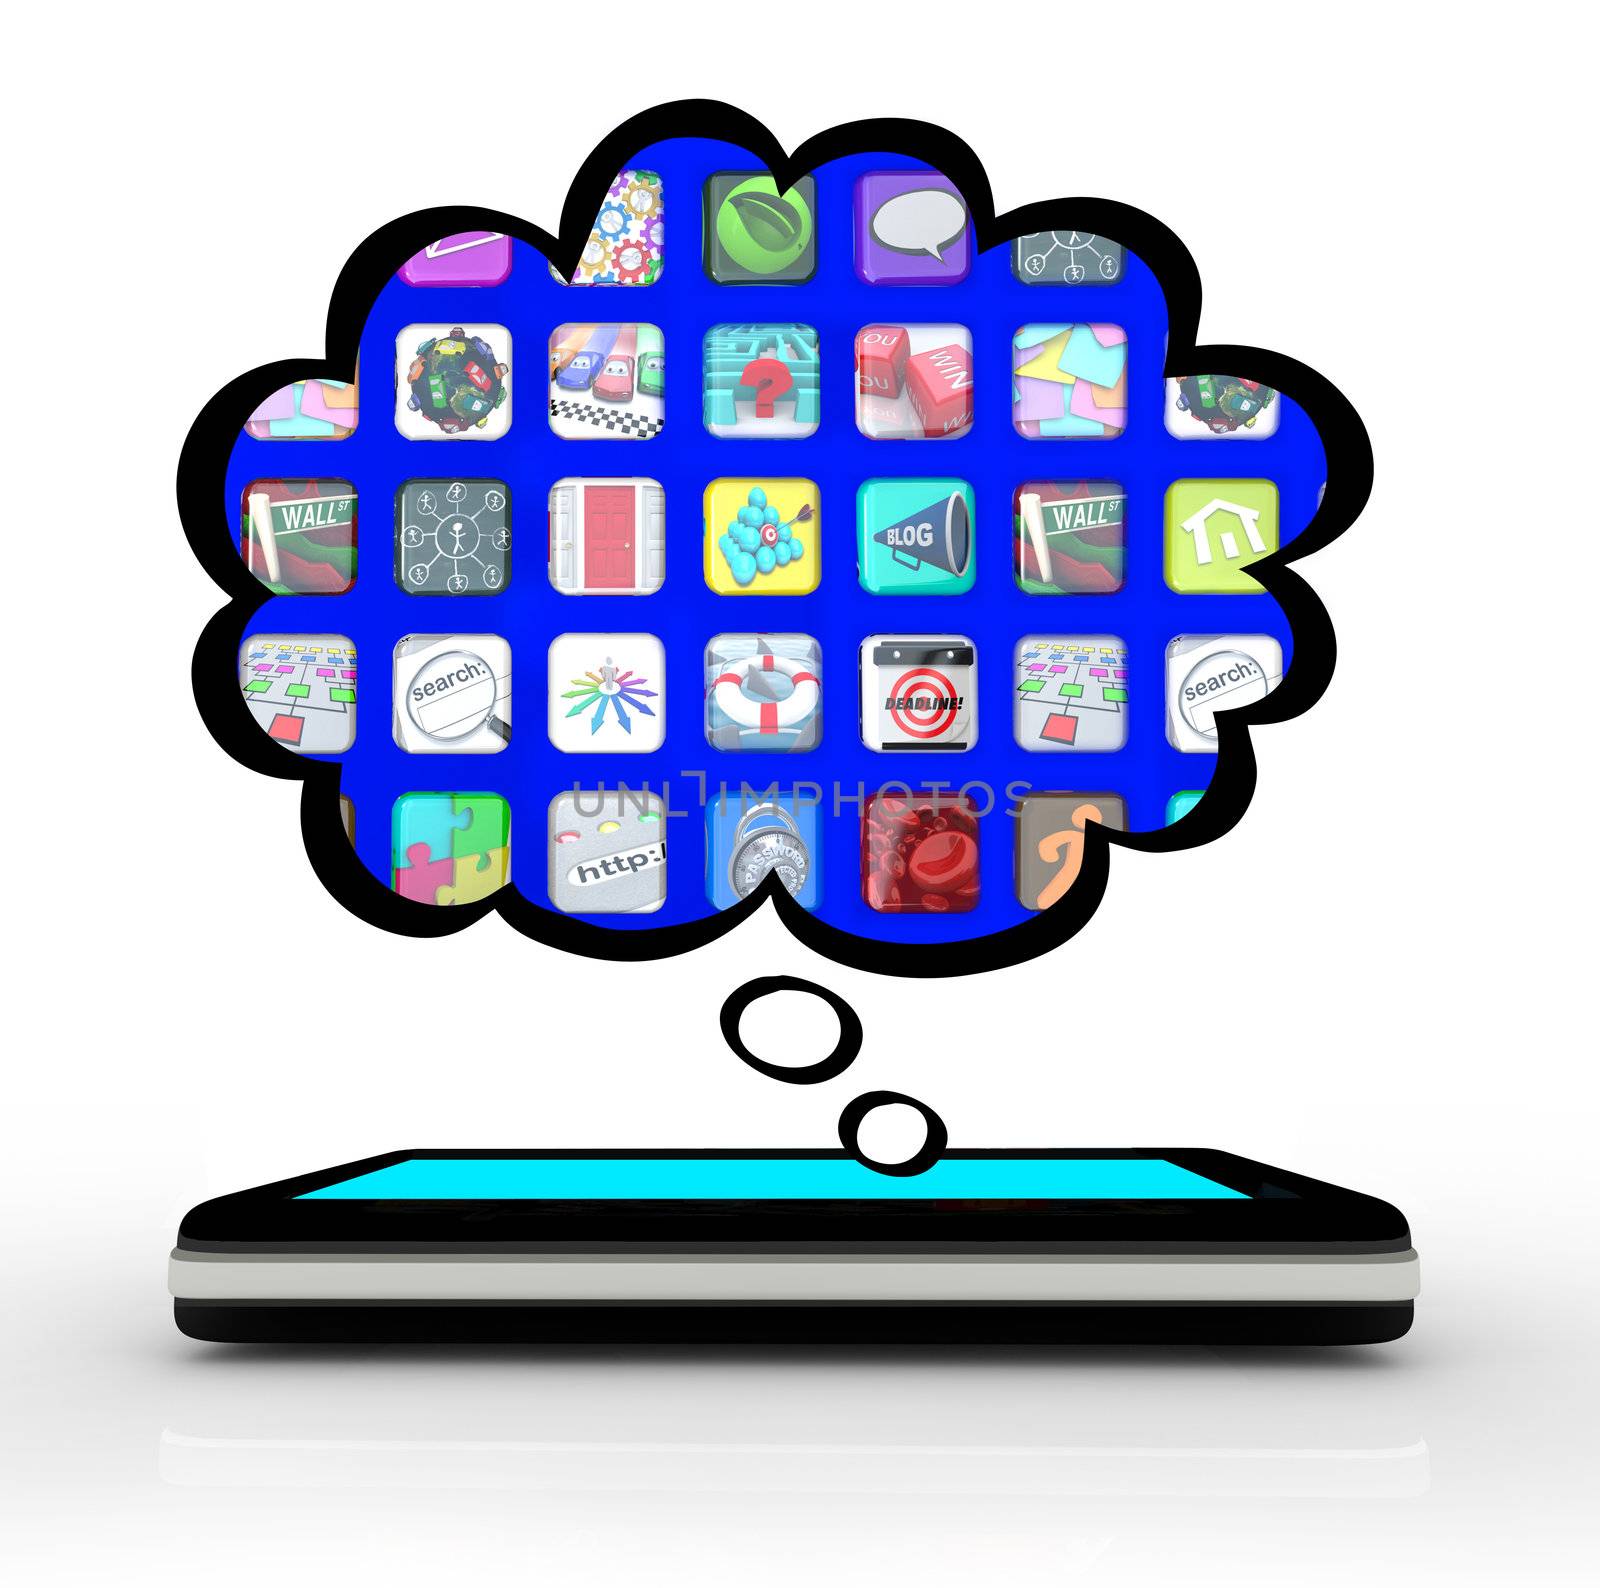 A smart phone thinks of application software icons with a thought cloud filled with app tiles showing the possibilities of downloading programs to an electronic device like a cellphone